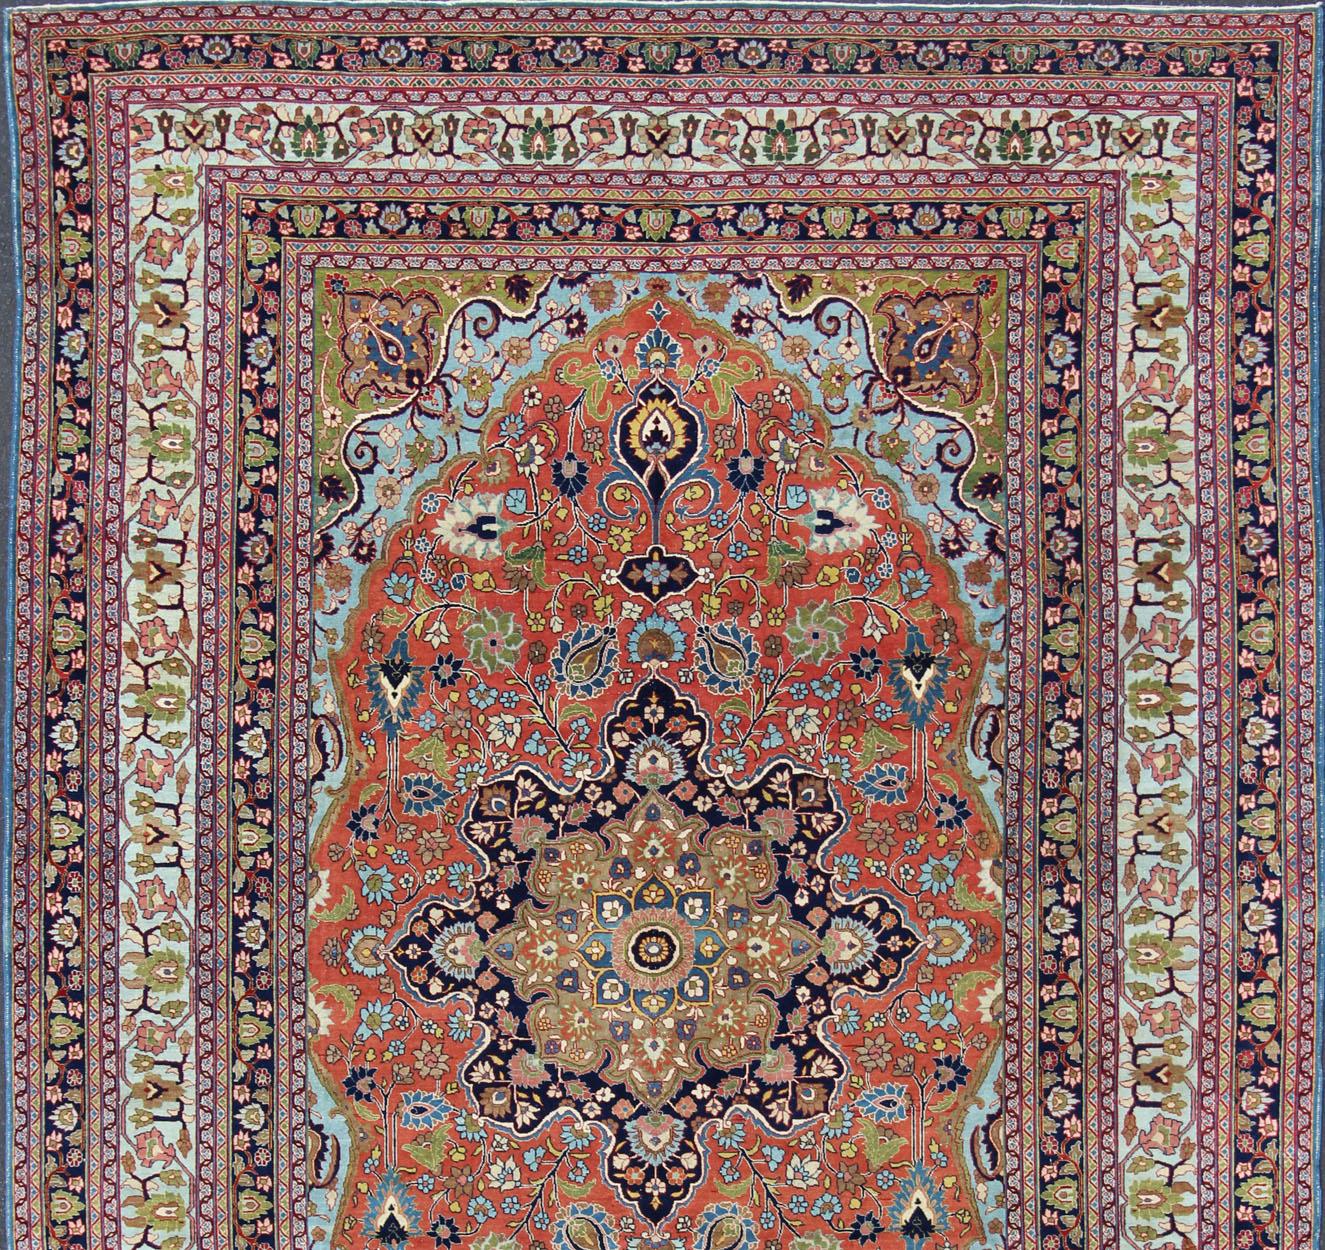 Finely woven antique Tabriz rug with circular, script-style medallion and orange field, Keivan Woven Arts/ rug / 17-0304. Classic Persian rug, traditional Persian rug, traditional Tabriz.
Measures: 10'1 x 14'2
This spectacular and colorful Persian